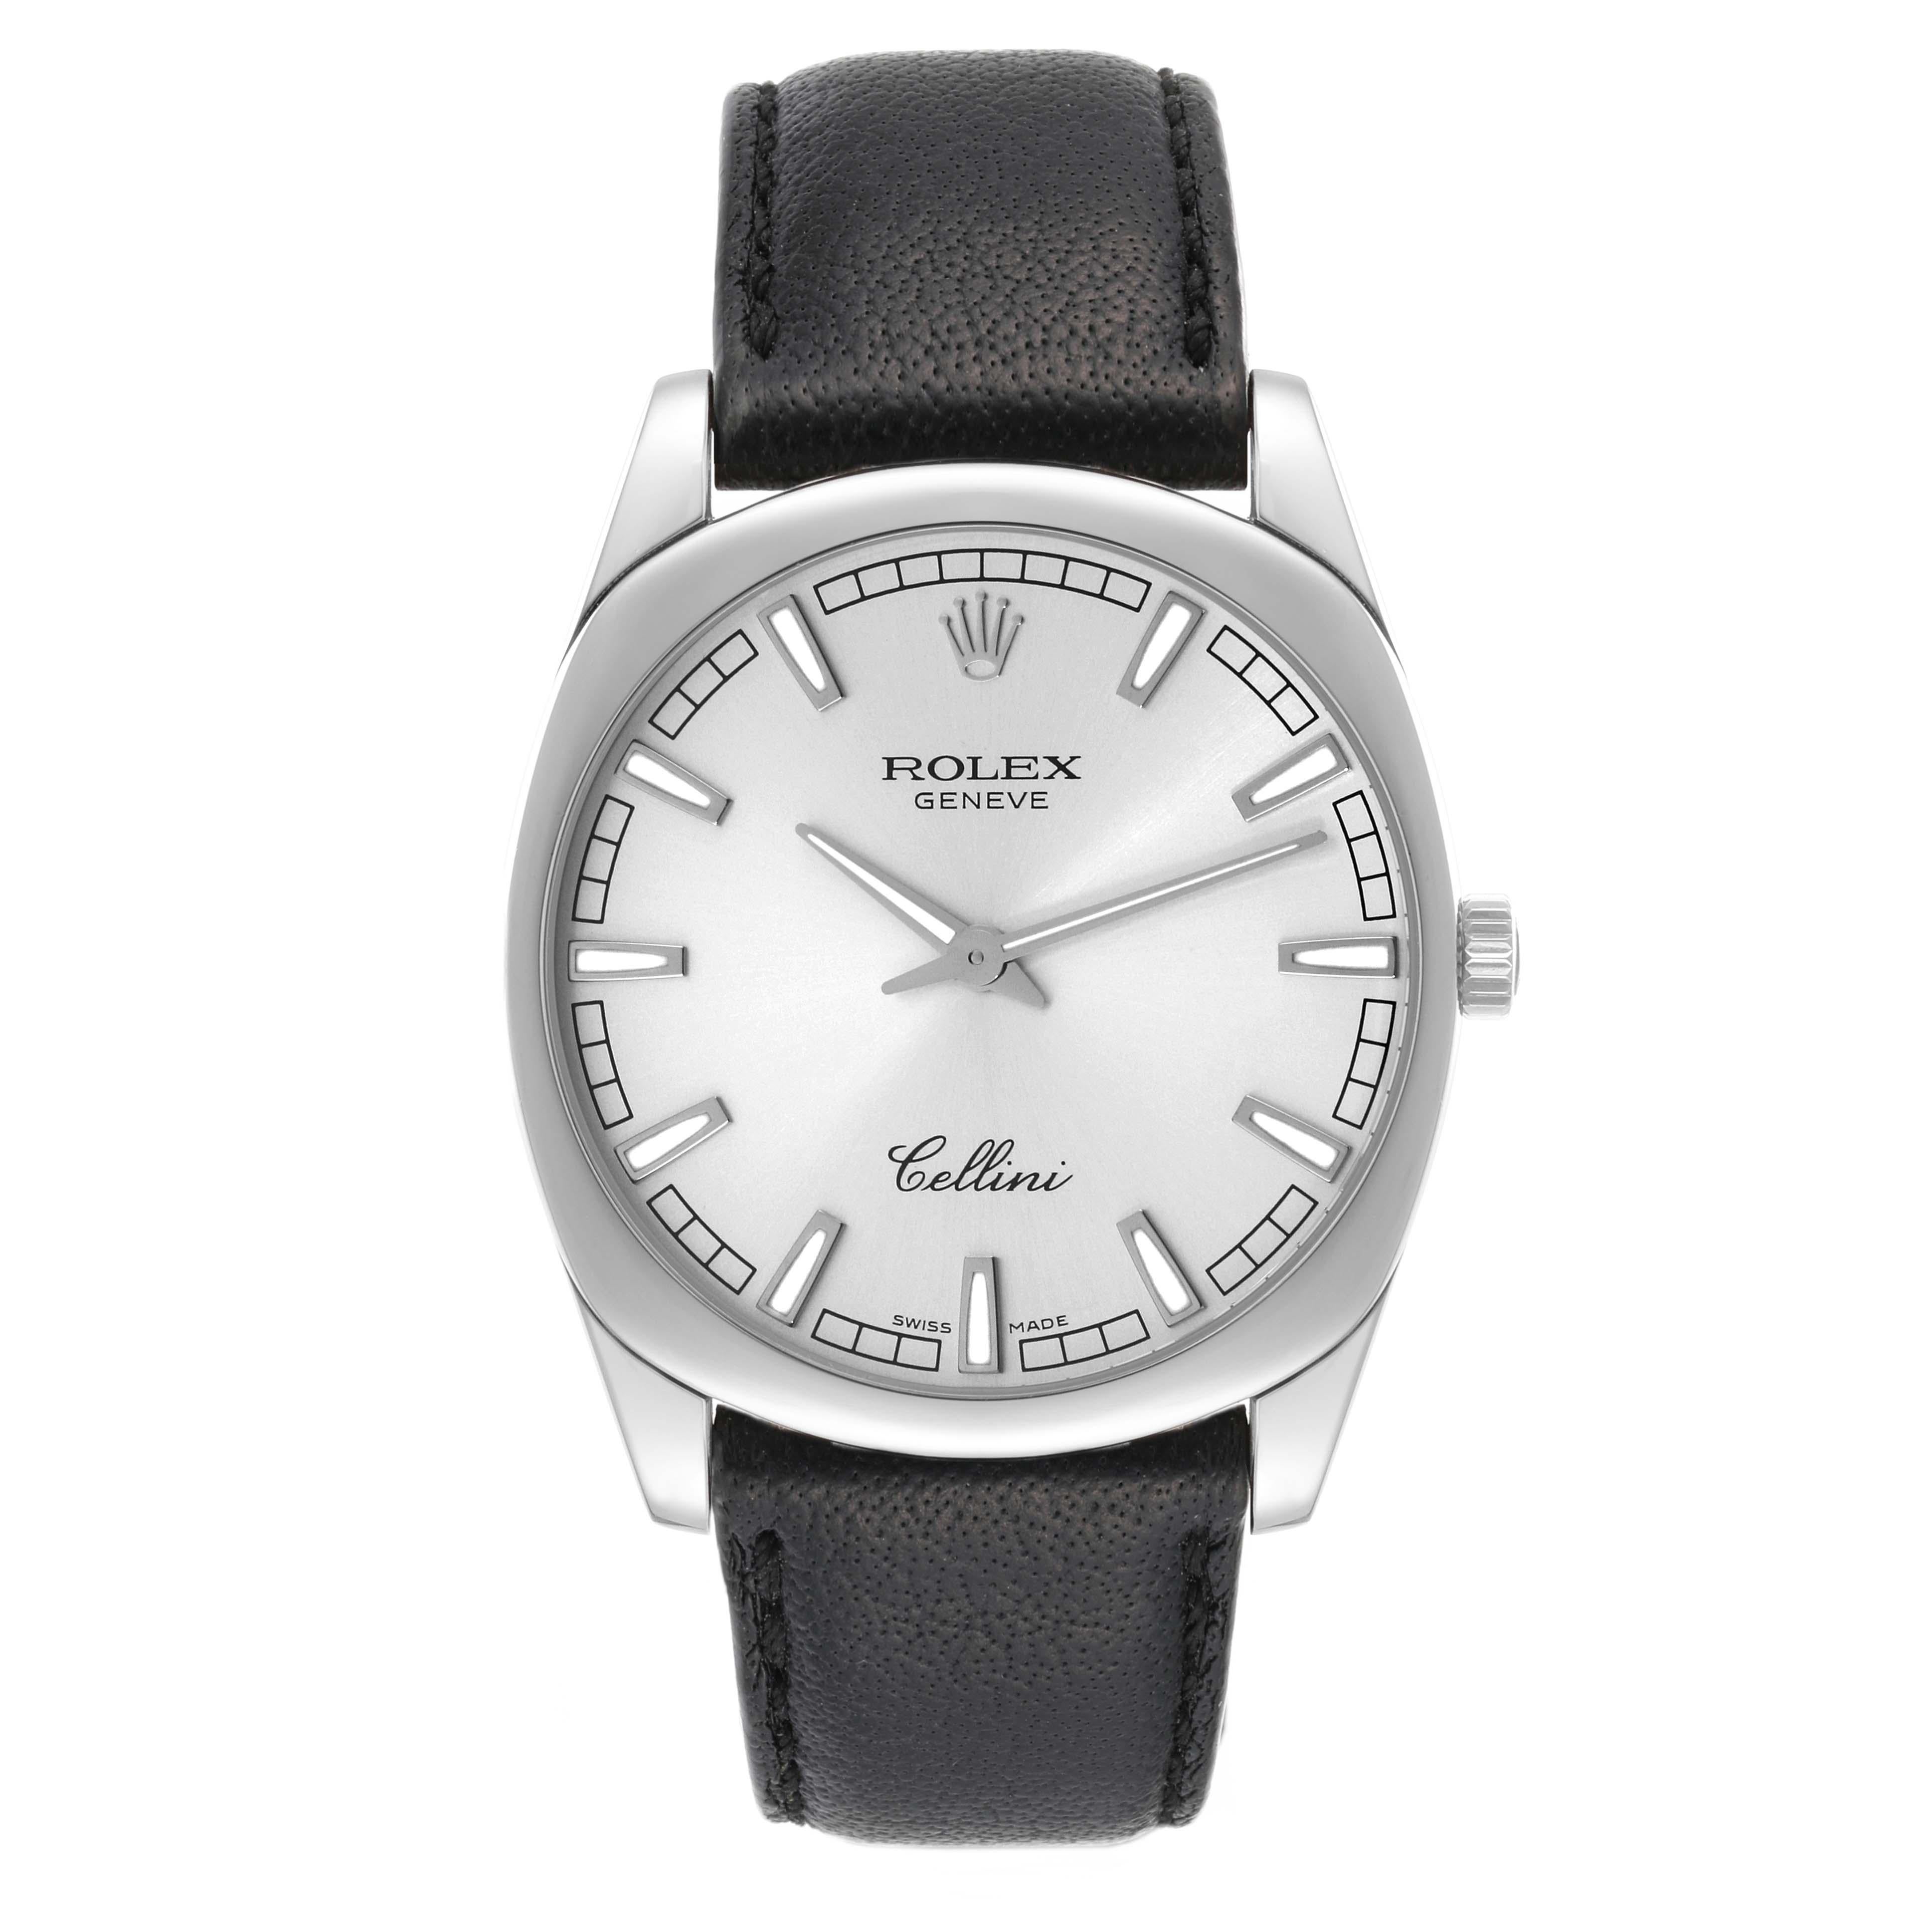 Rolex Cellini Danaos White Gold Silver Dial Mens Watch 4243 Box Card. Manual winding movement. 18k white gold rounded rectangular case 38.0 mm. Rolex logo on a crown. 18k white gold smooth bezel. Scratch resistant sapphire crystal. Silver dial with